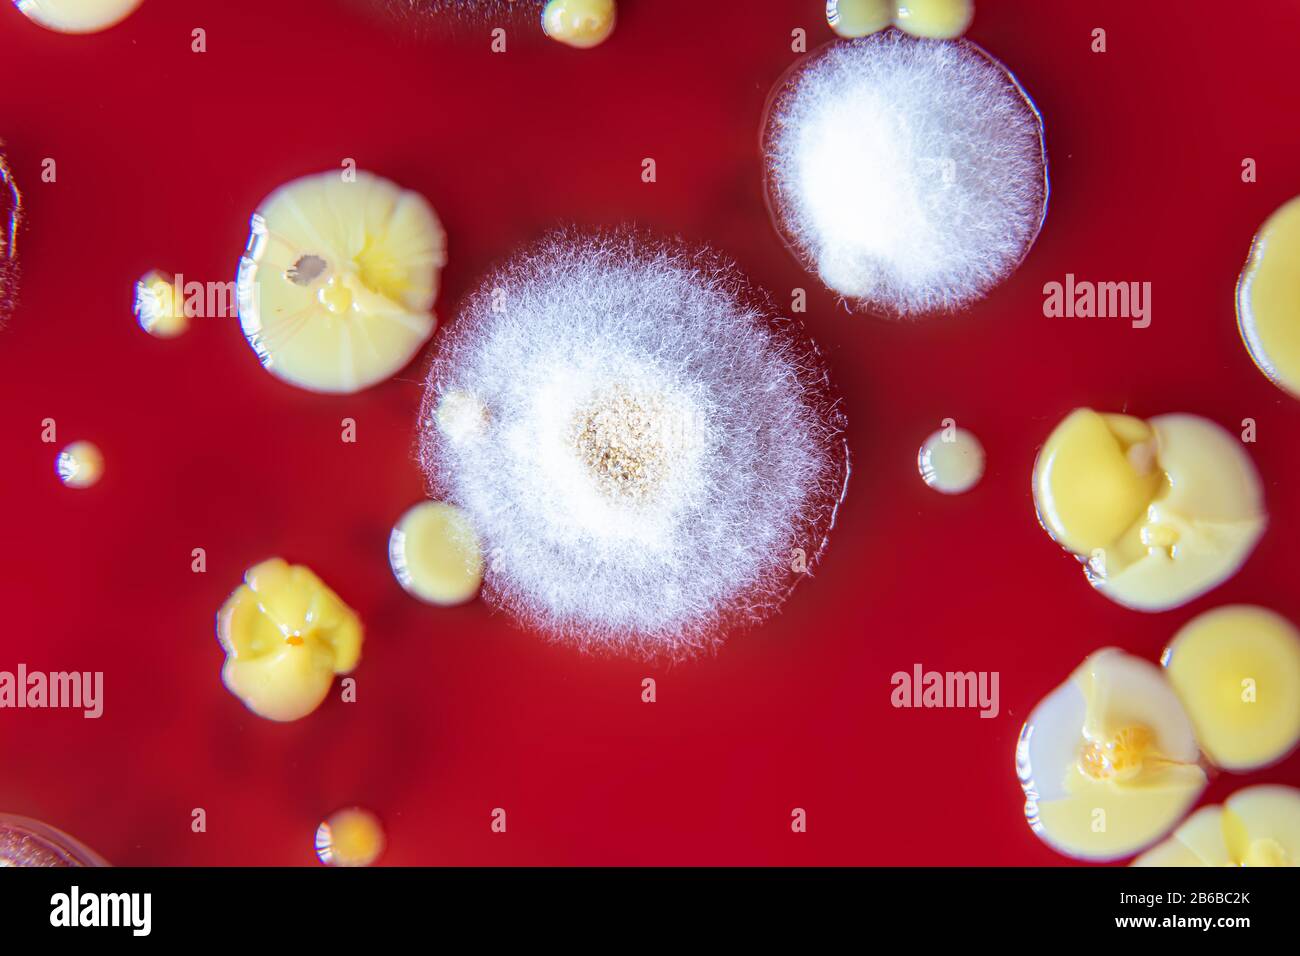 Mixed of bacteria colonies in Petri dish Stock Photo